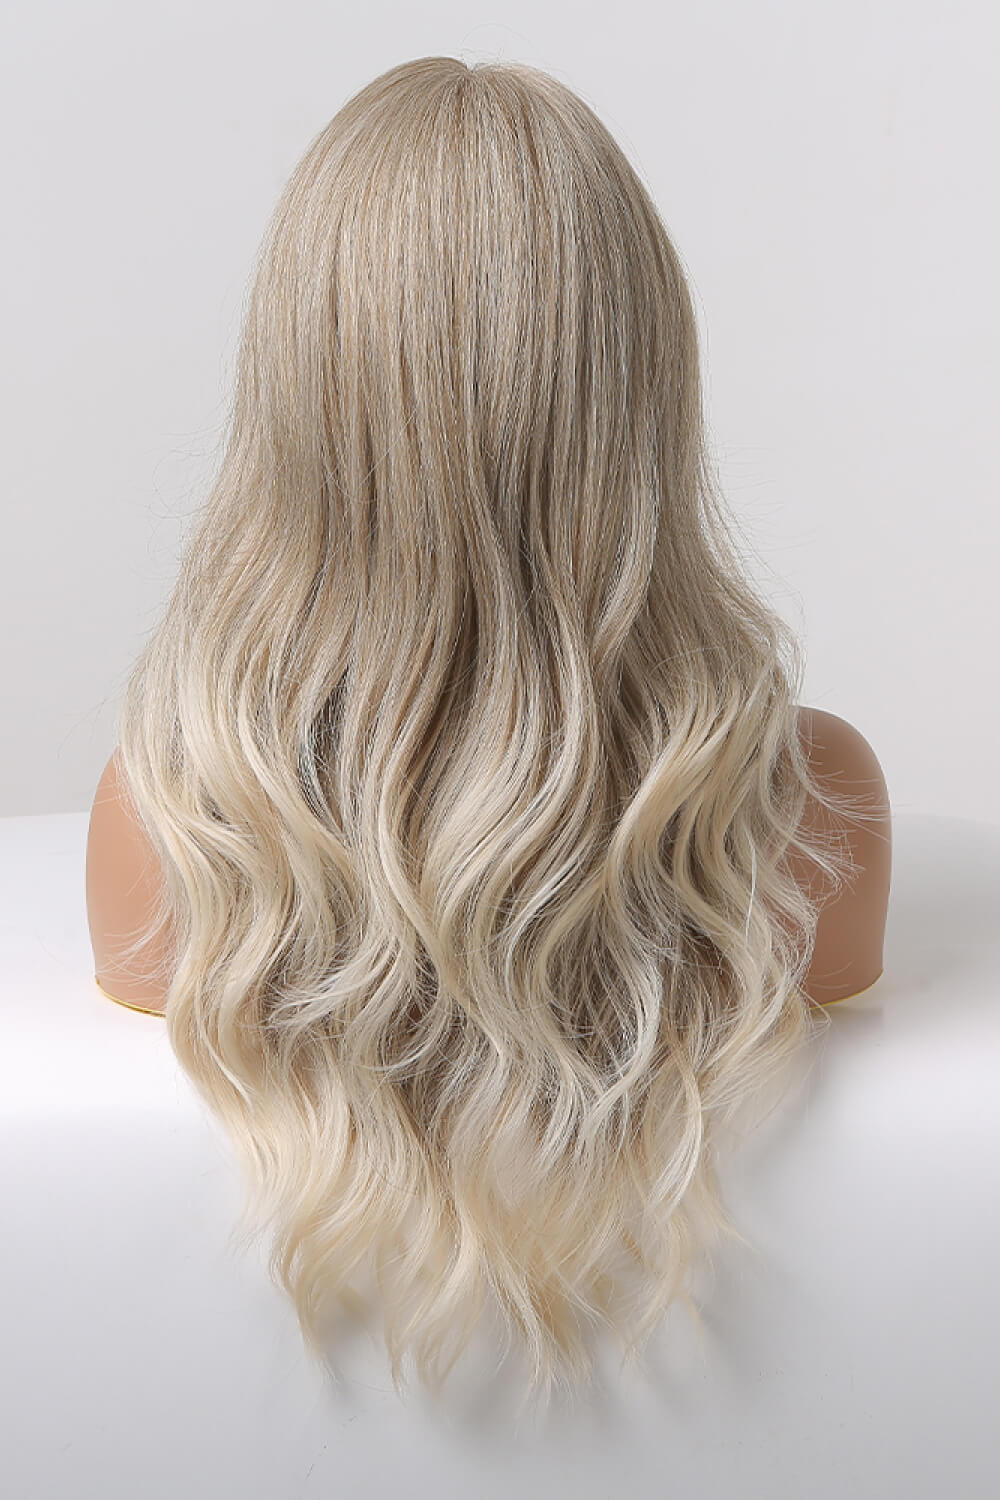 Gray Summer 13*2" Lace Front Wigs Synthetic Long Wave 24" 150% Density in Medium Blonde Highlights Wigs